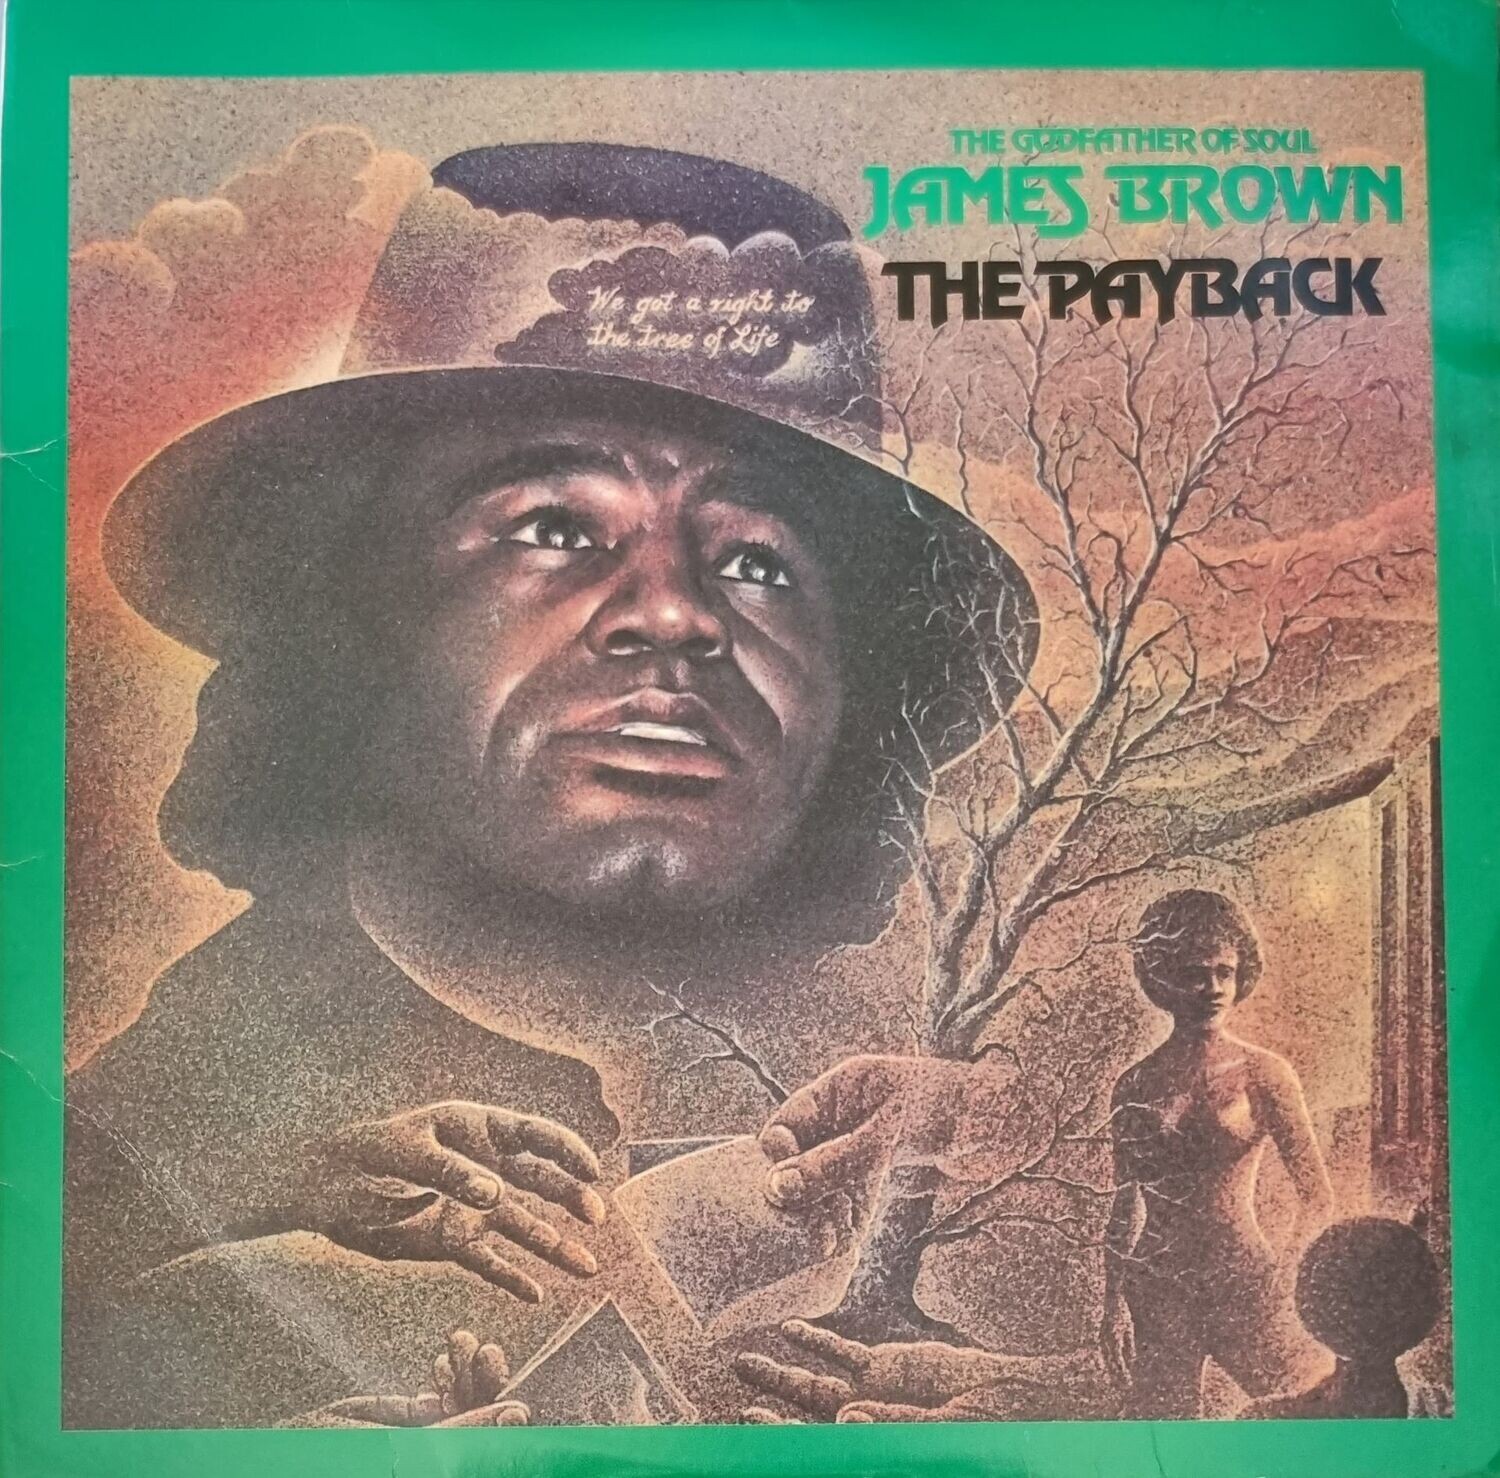 James Brown – The Payback (1987) 2 x LP